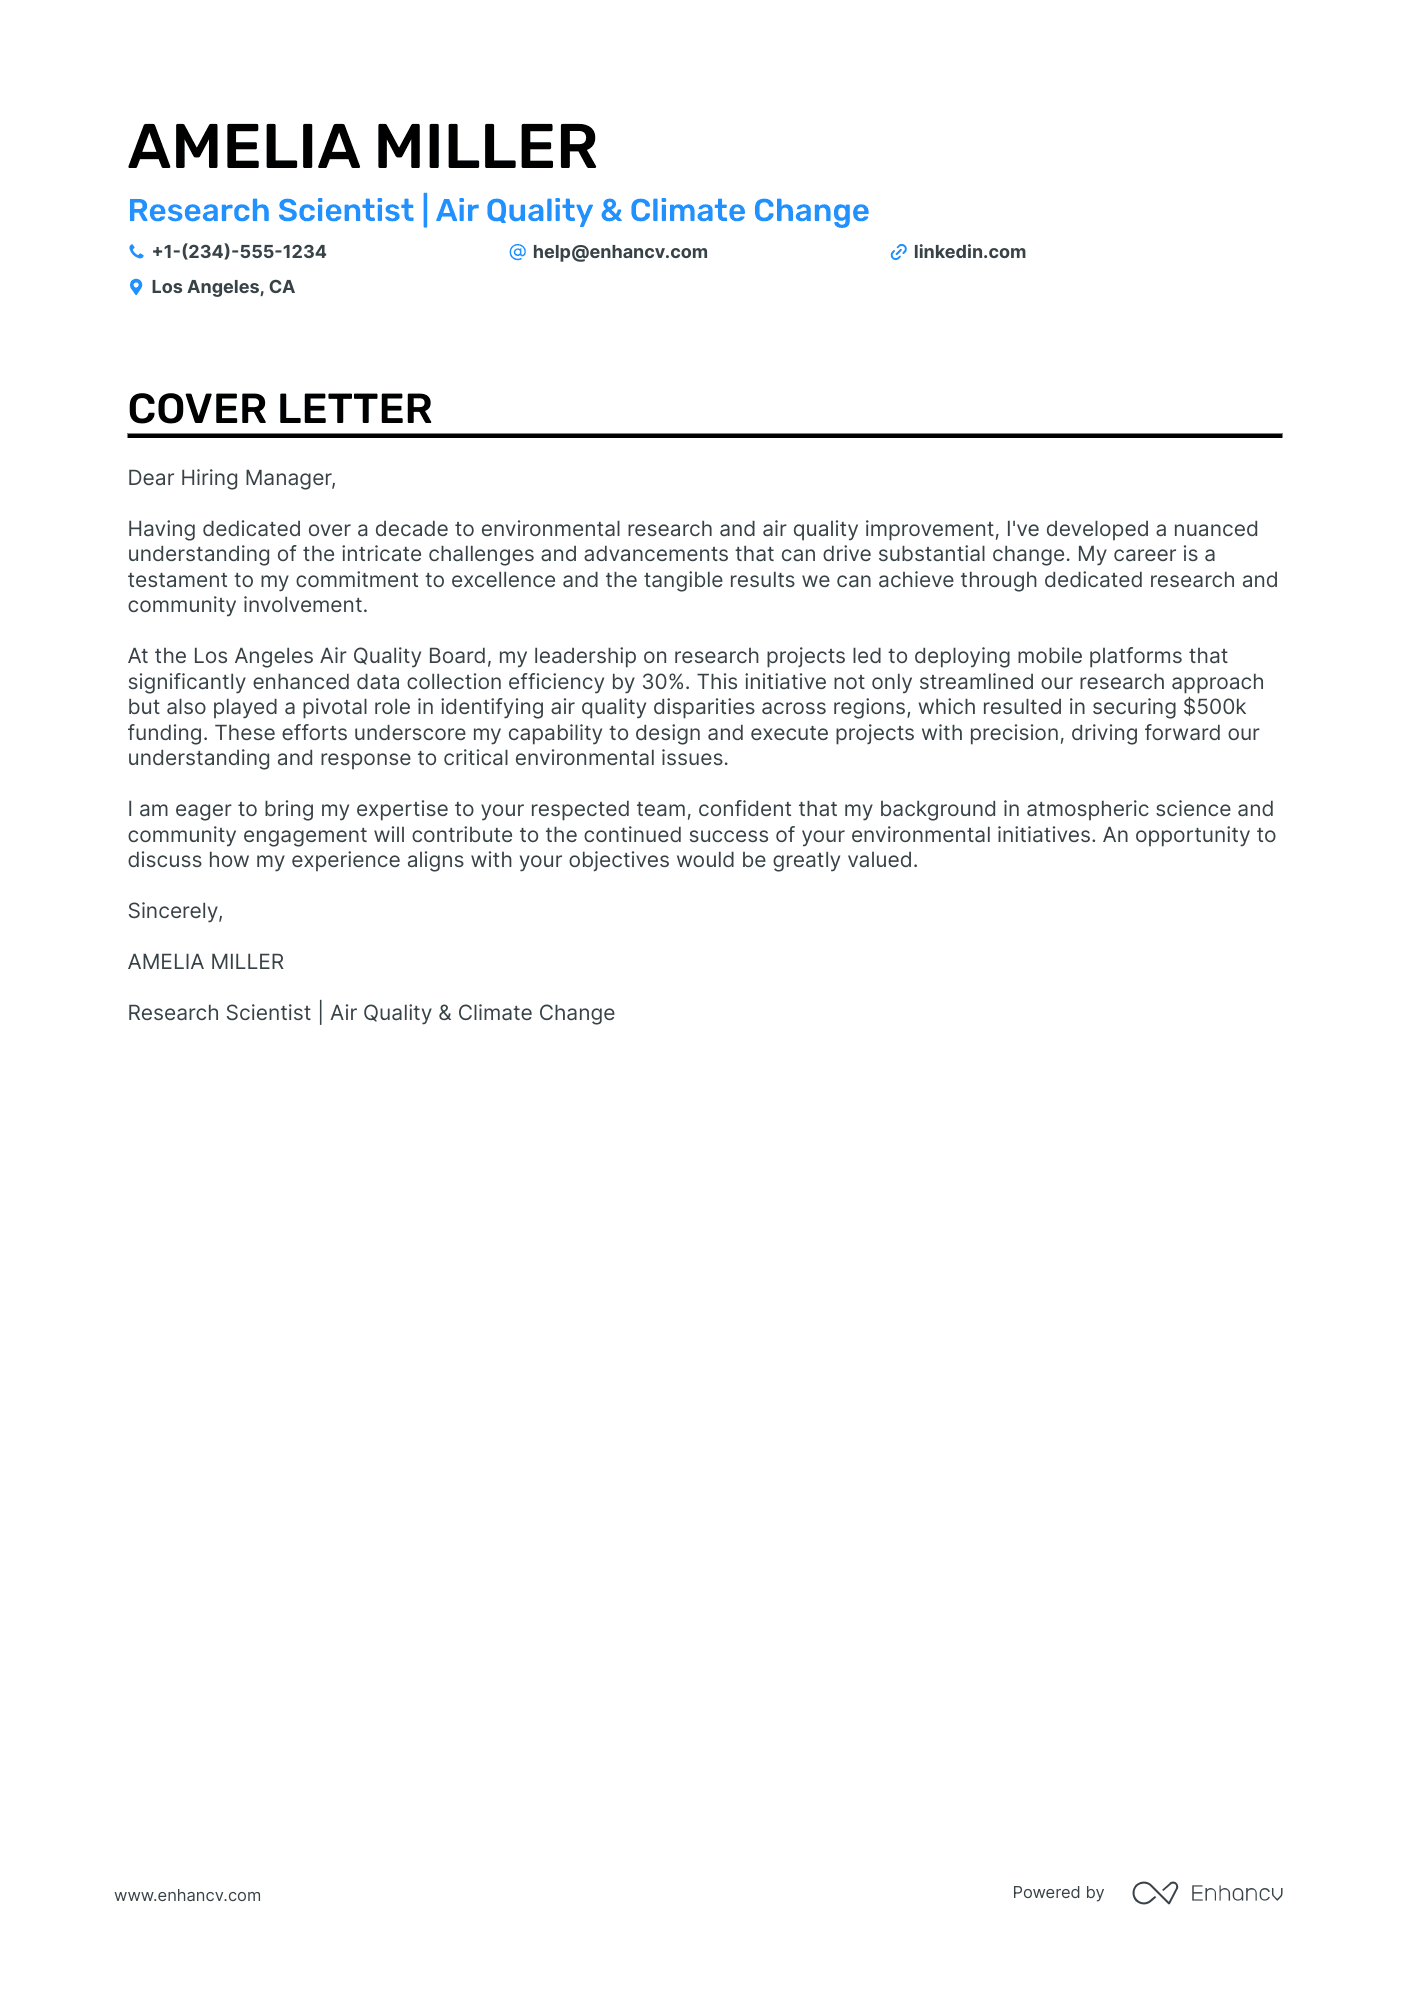 research scientist job cover letter